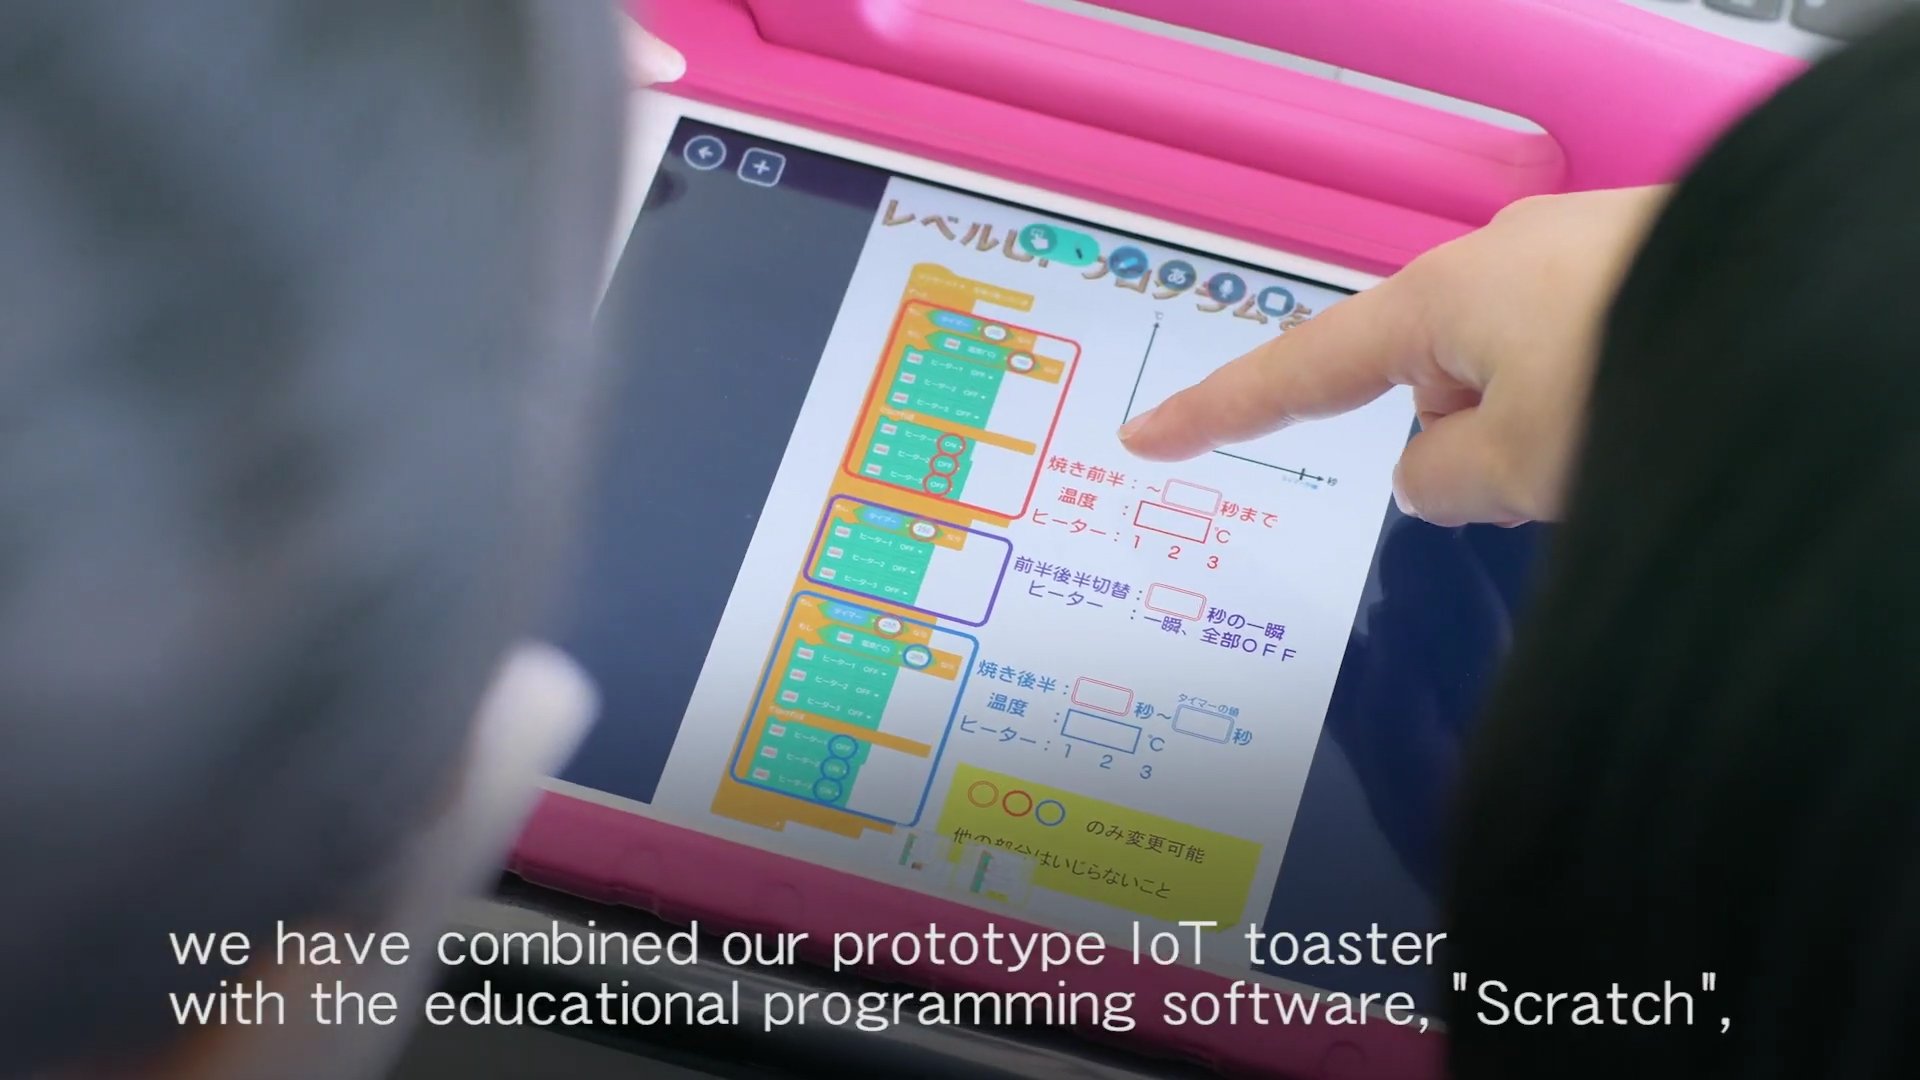 A screenshot from the video 'Scratch Home - Learning about Biology and Chemistry through Programming'